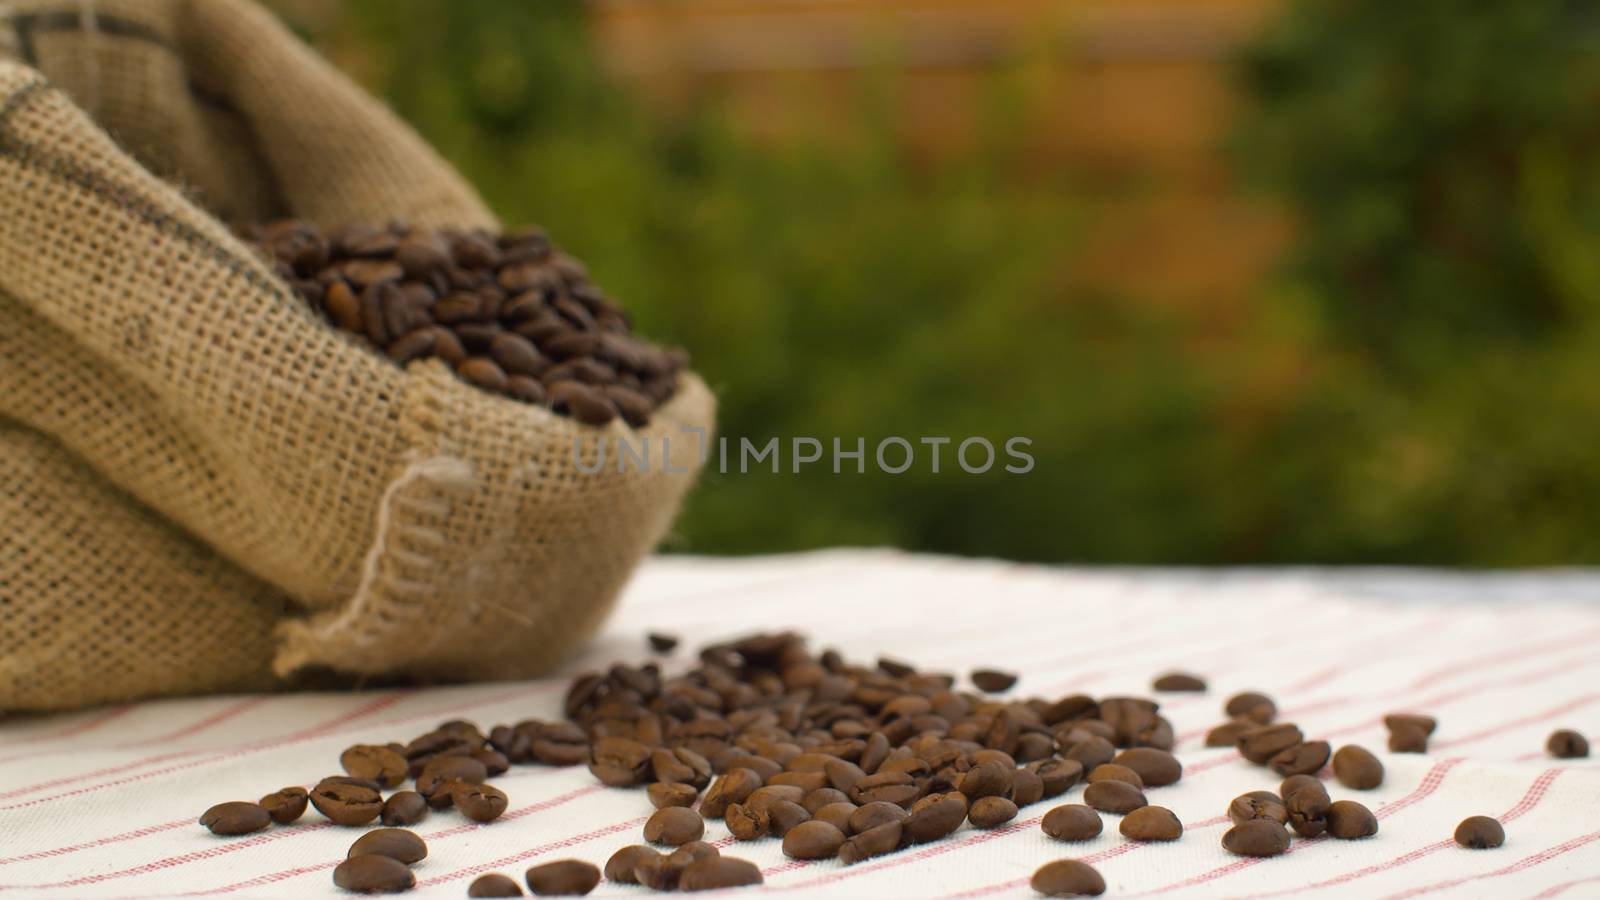 Burlap sack with coffee beans by Alize